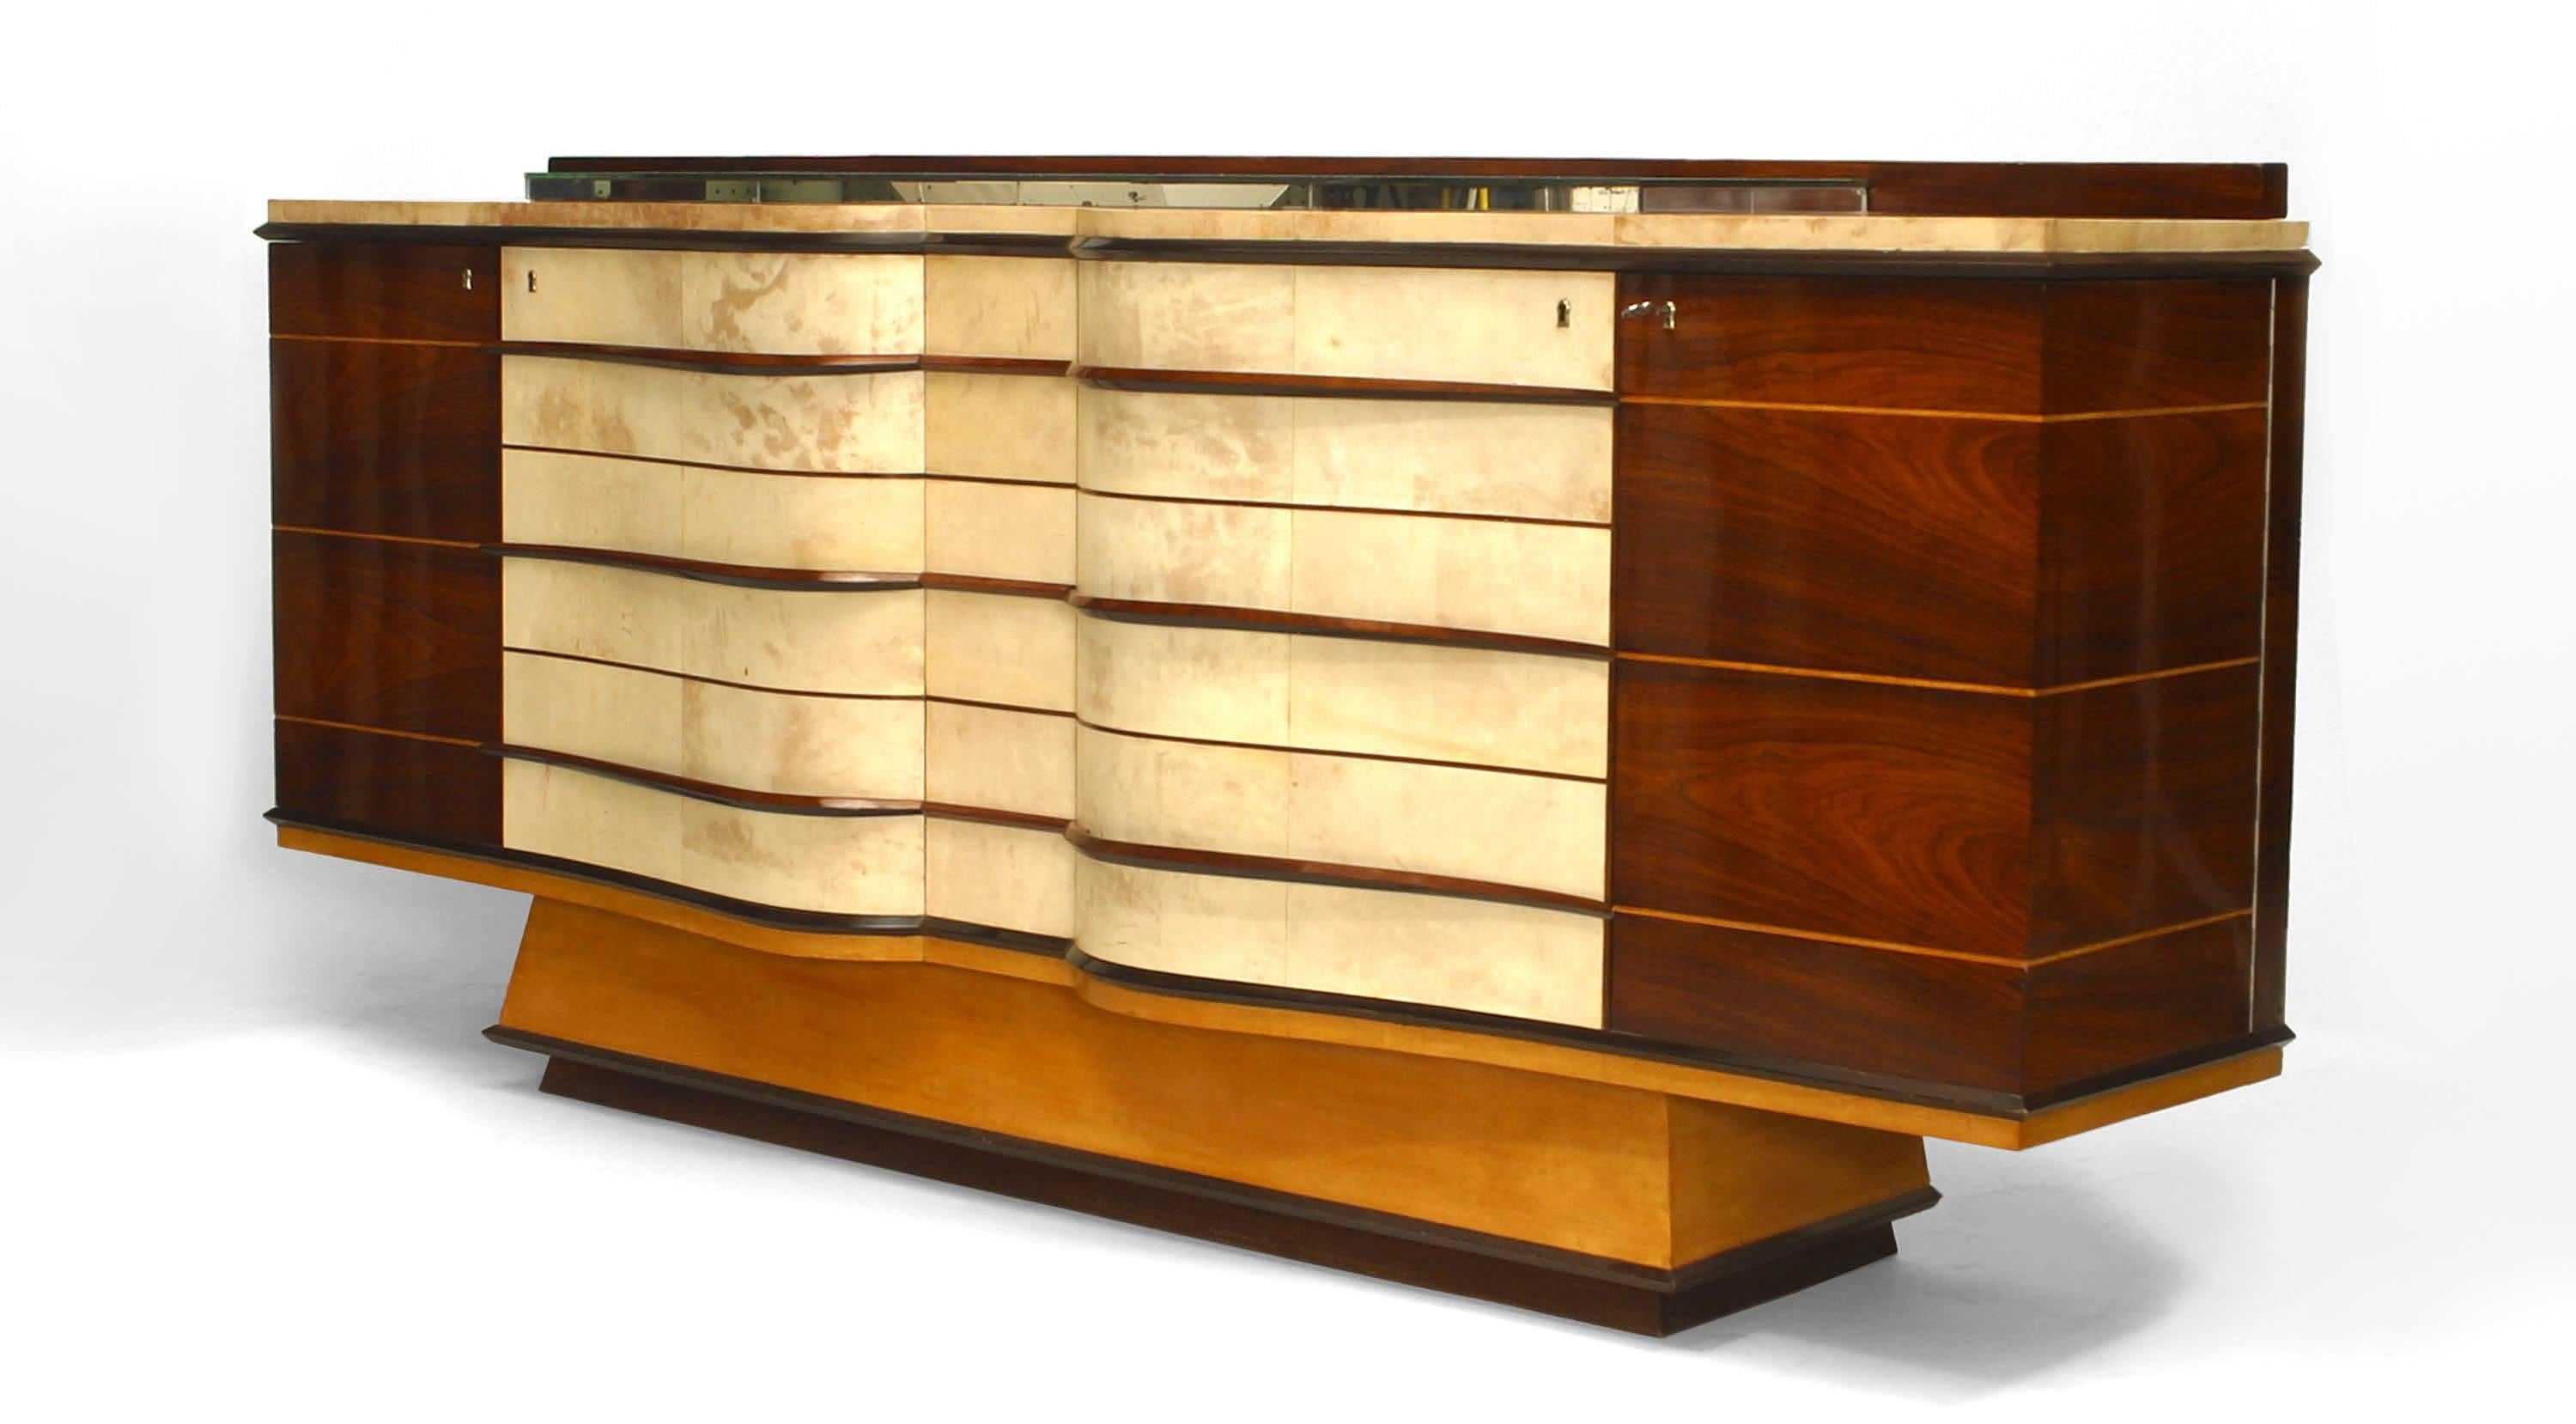 Italian Mid-Century (1940s) rosewood and parchment 4 door sideboard elevated on a maple base with a raised mirrored center top (signed: DAGHIA, BOLOGNA)
